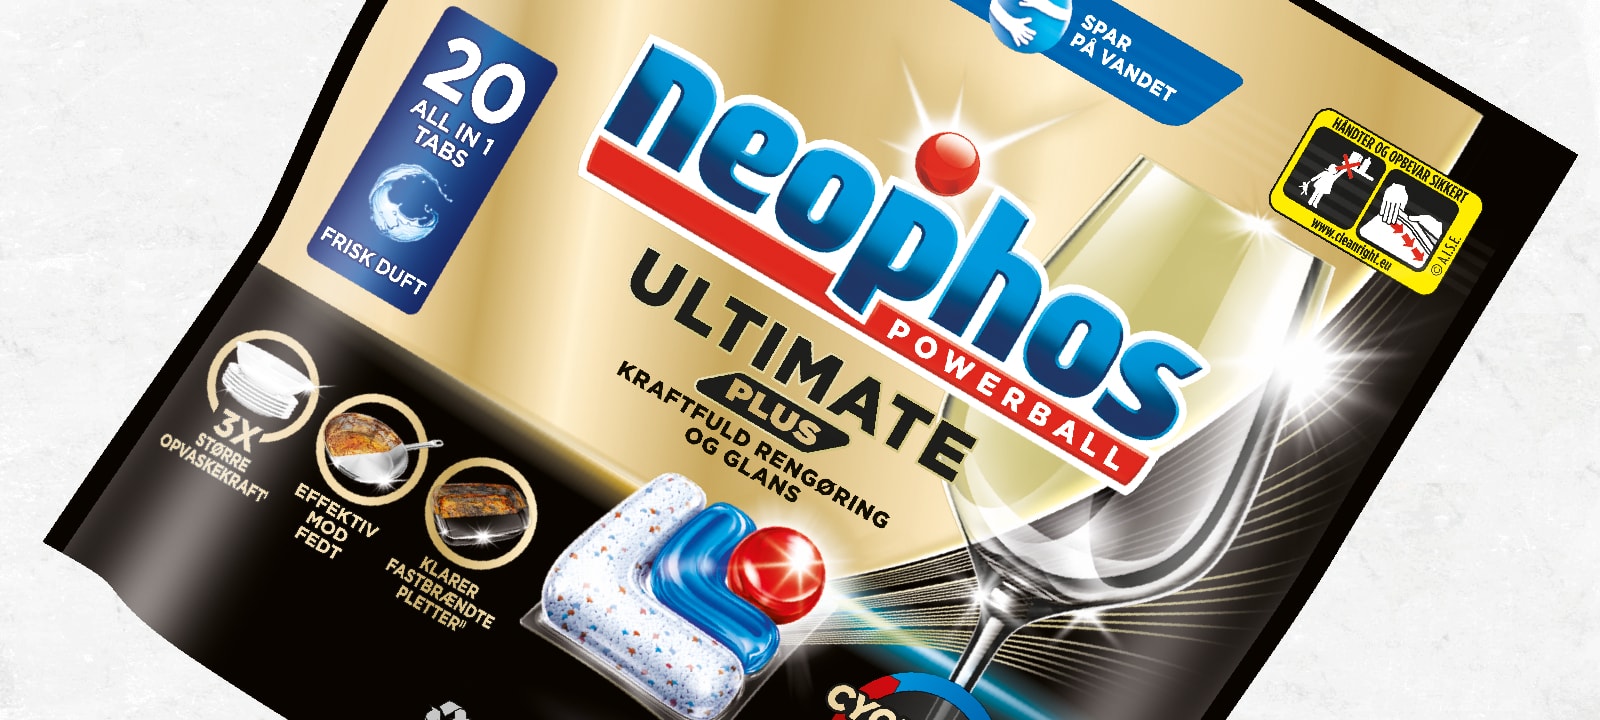 Neophos Ultimate Plus All in 1 tablets 20